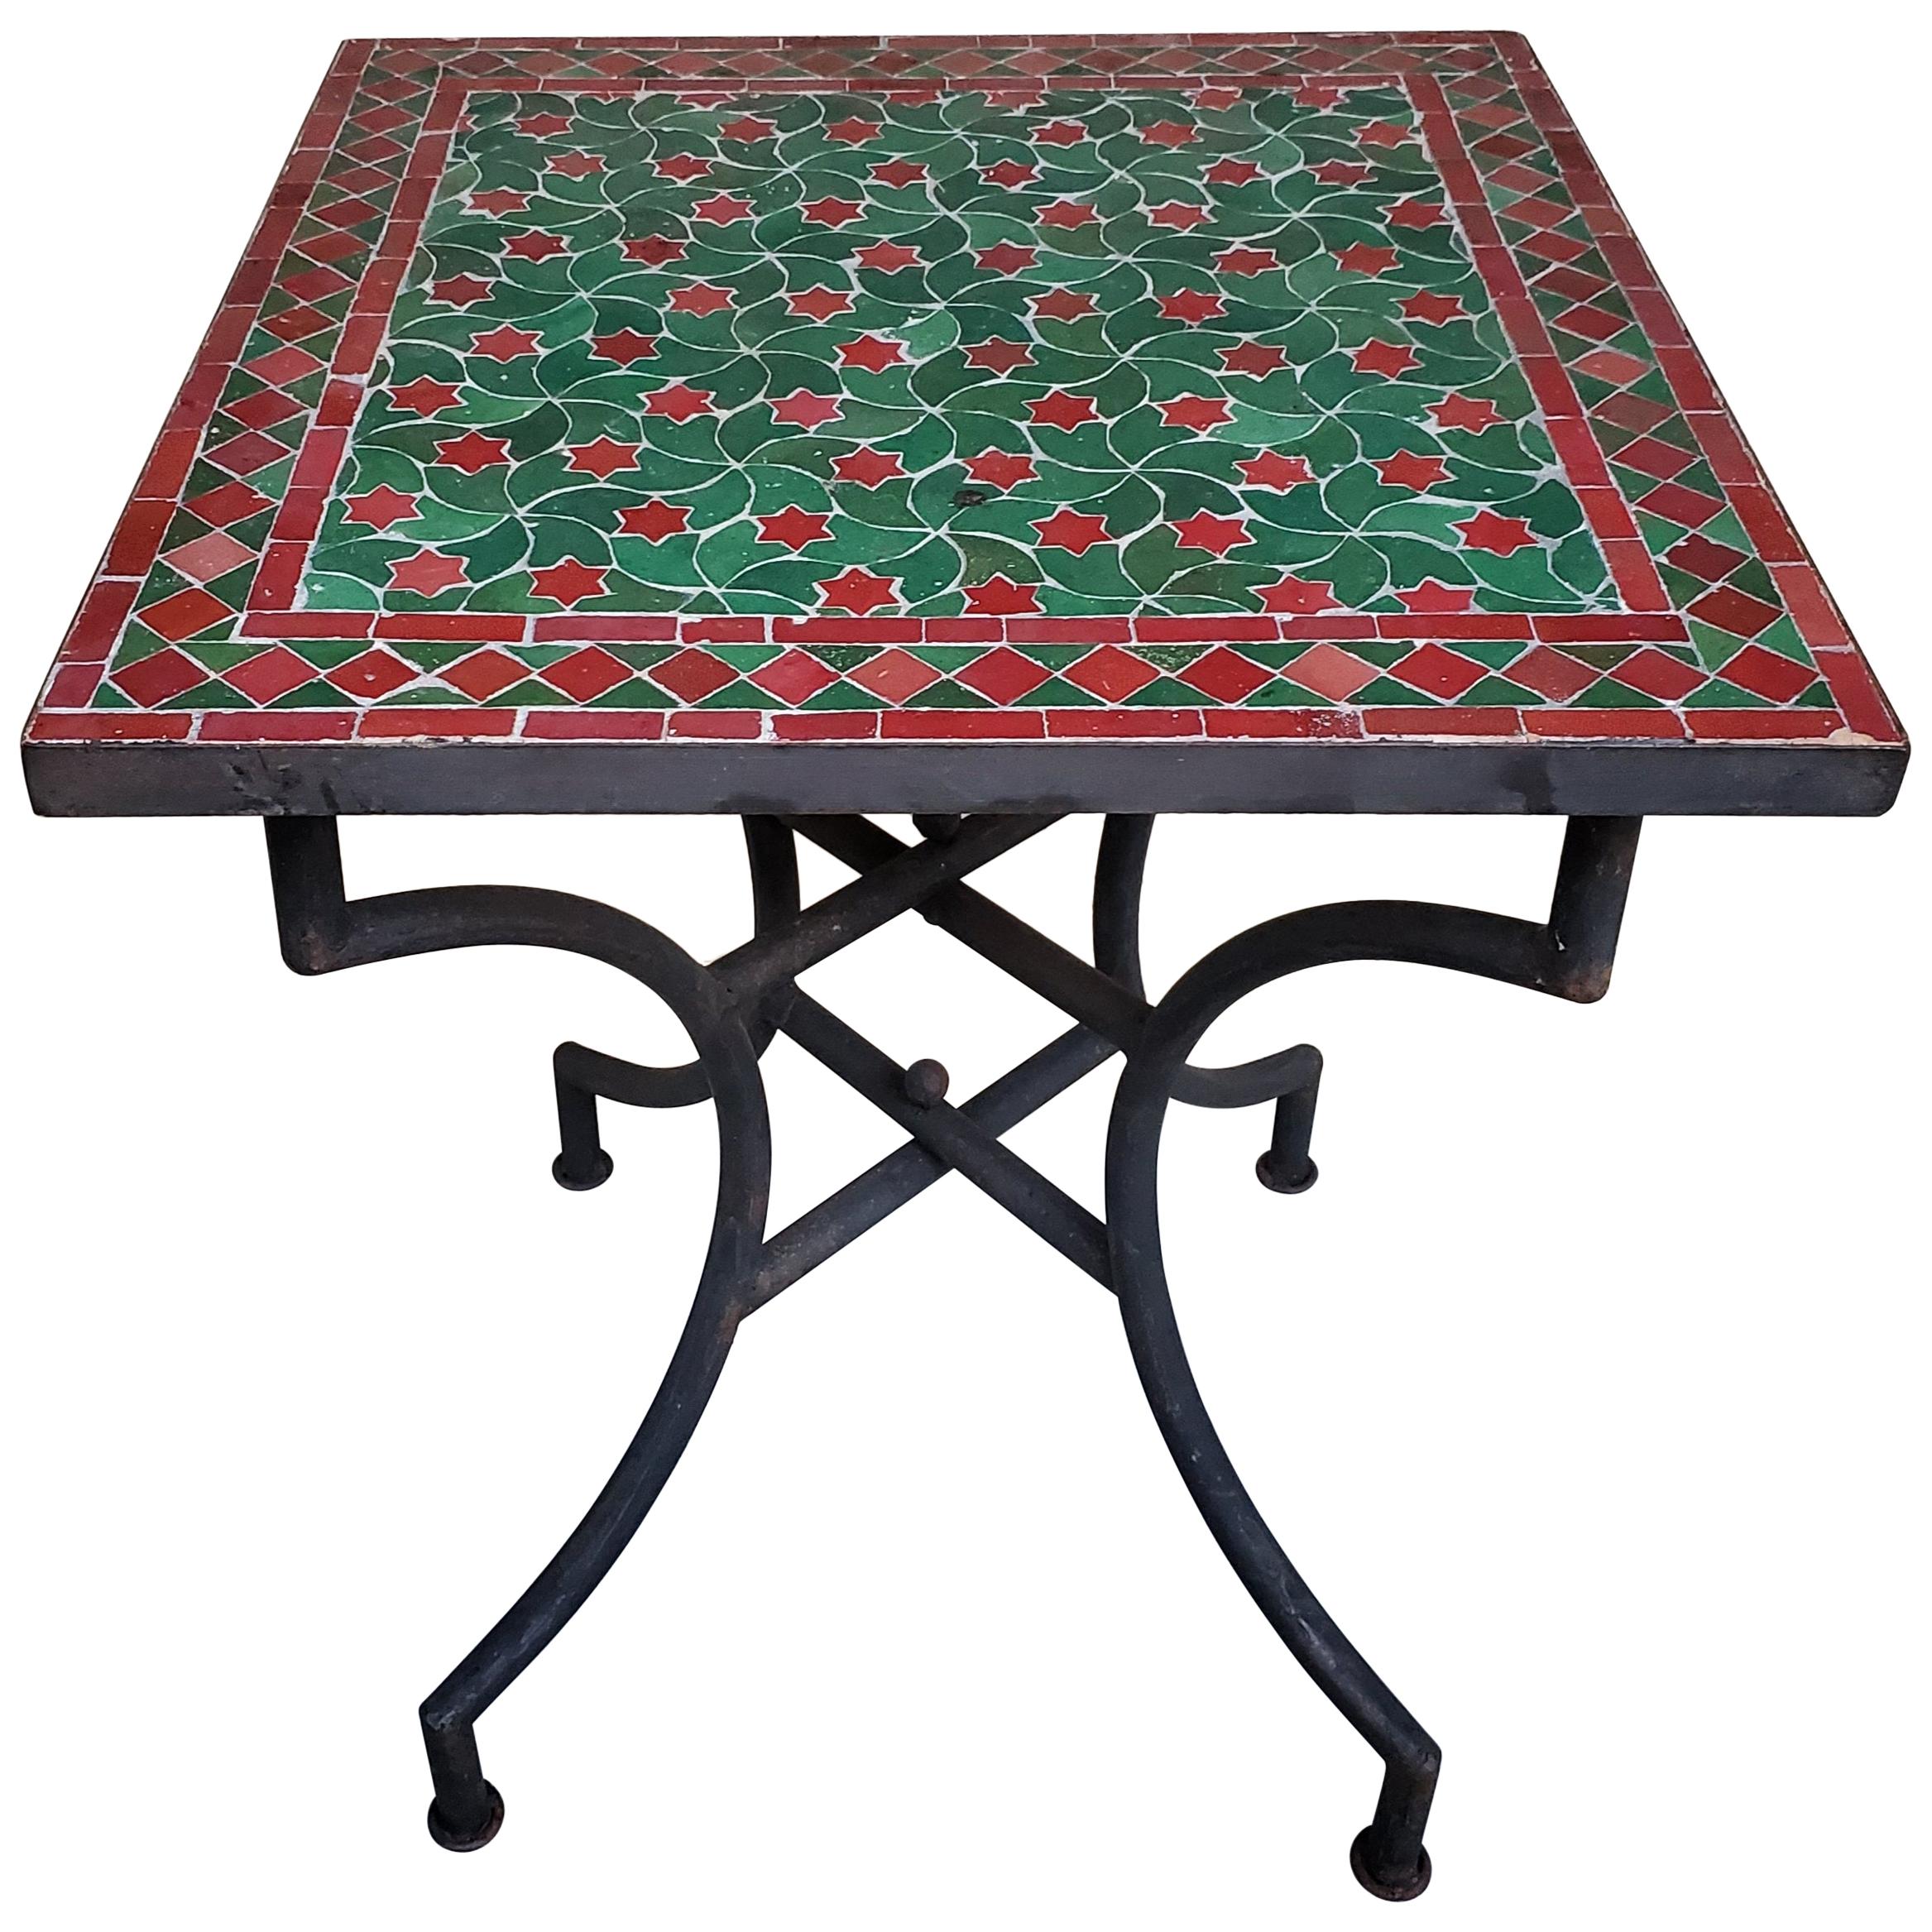 Burgundy and Green Moroccan Mosaic Table For Sale